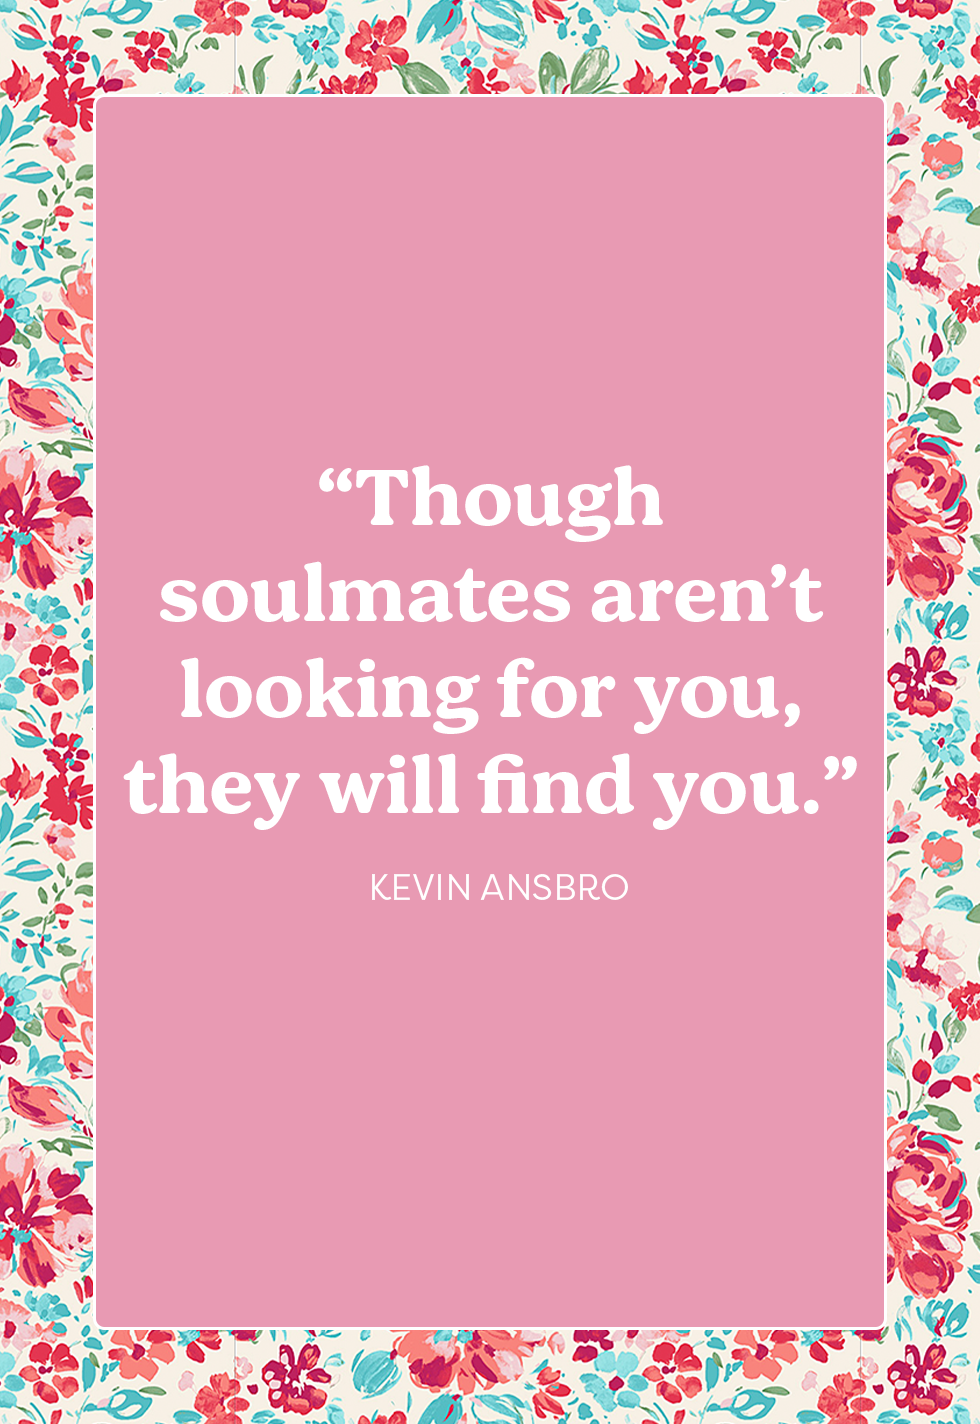 Deep Quotes About Soulmates: Though Soulmates Aren’t Looking For You